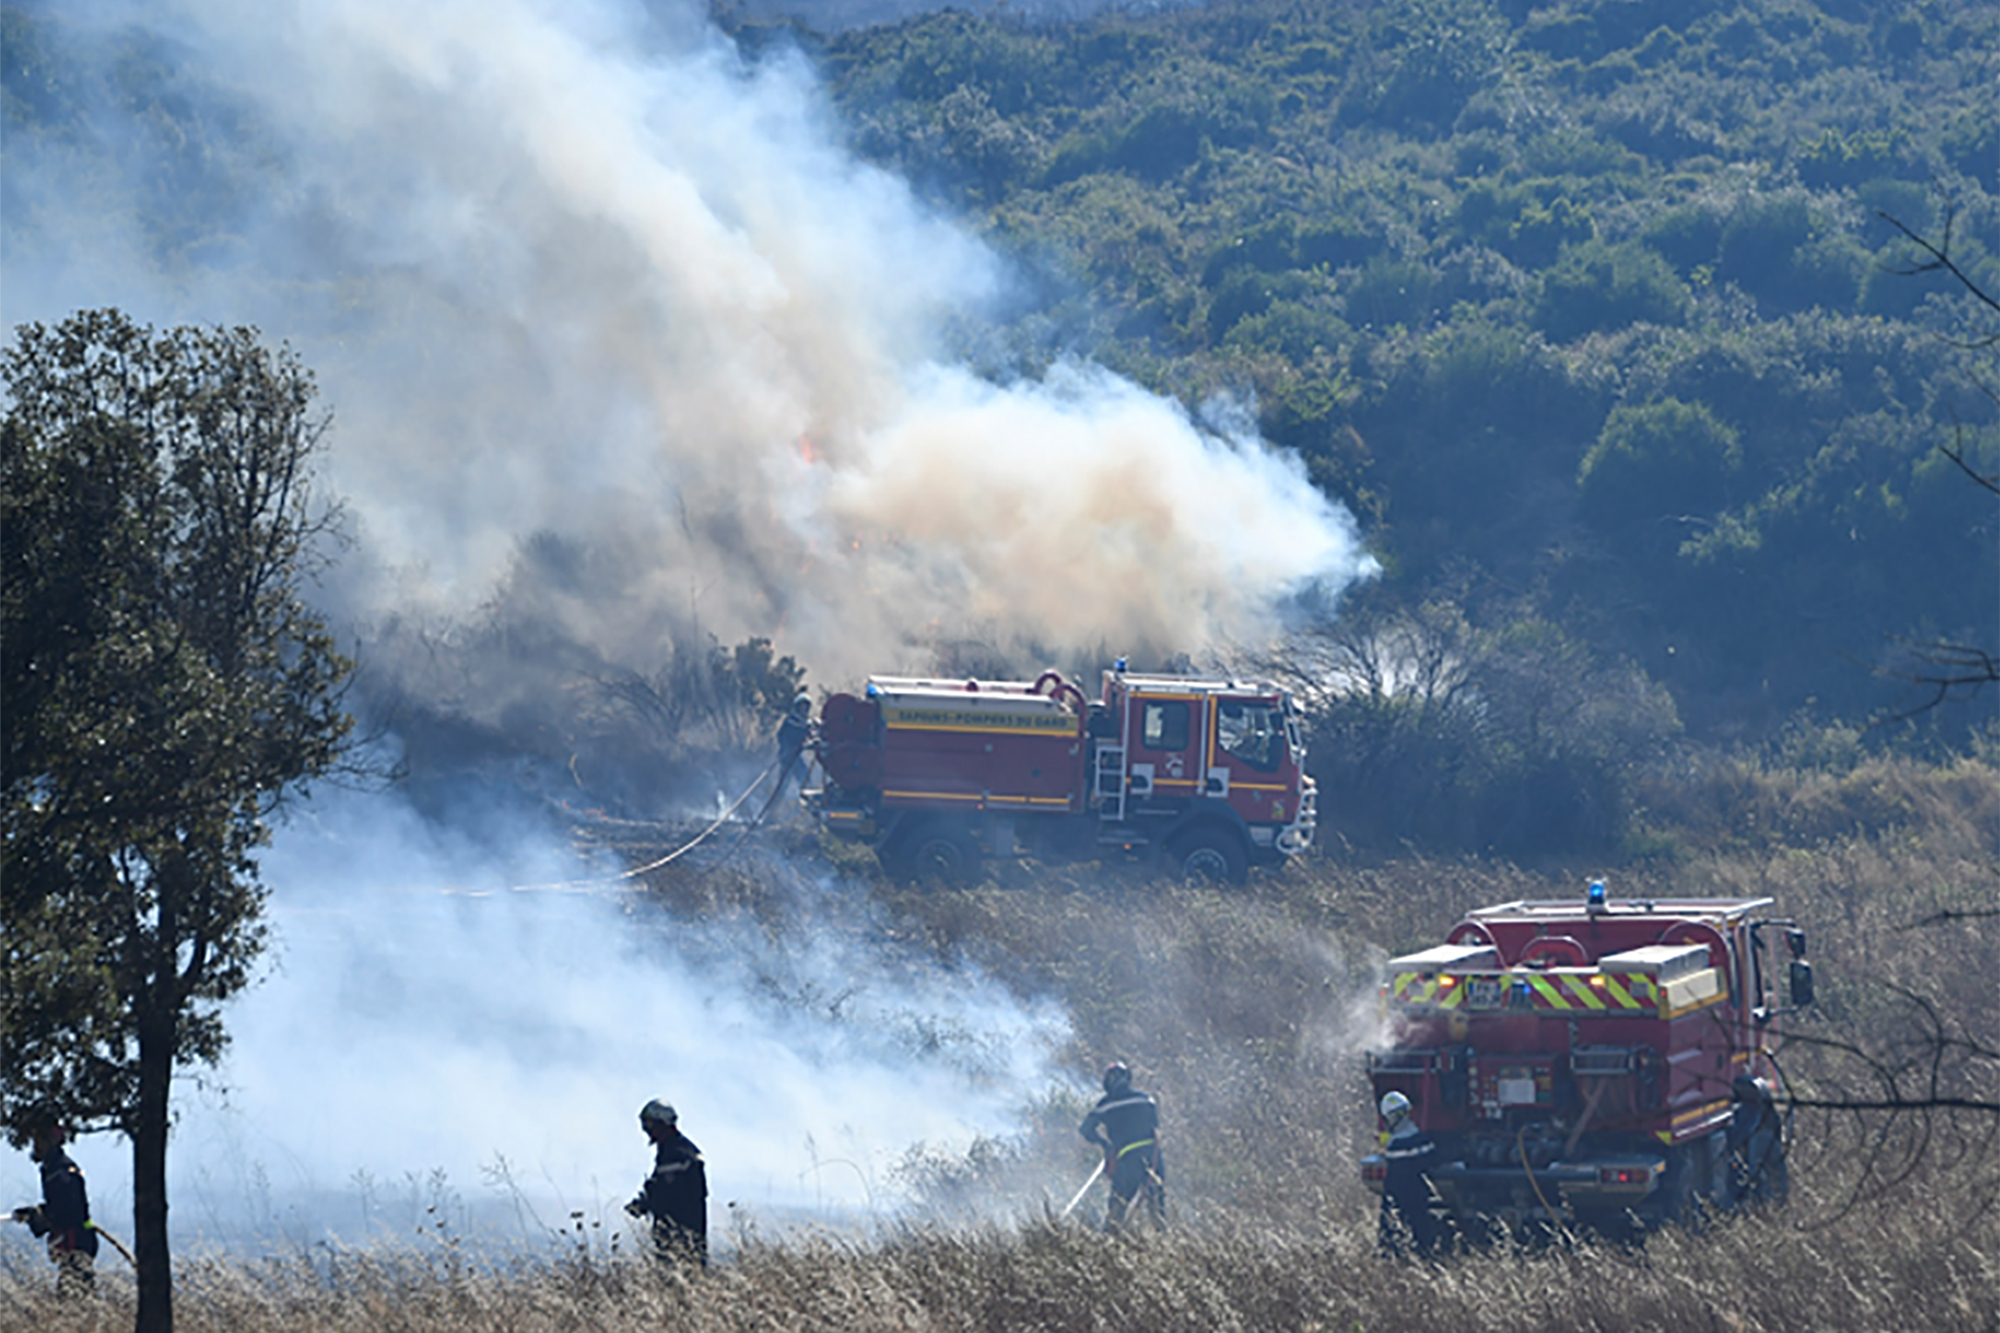 Firefighters tackling the blaze